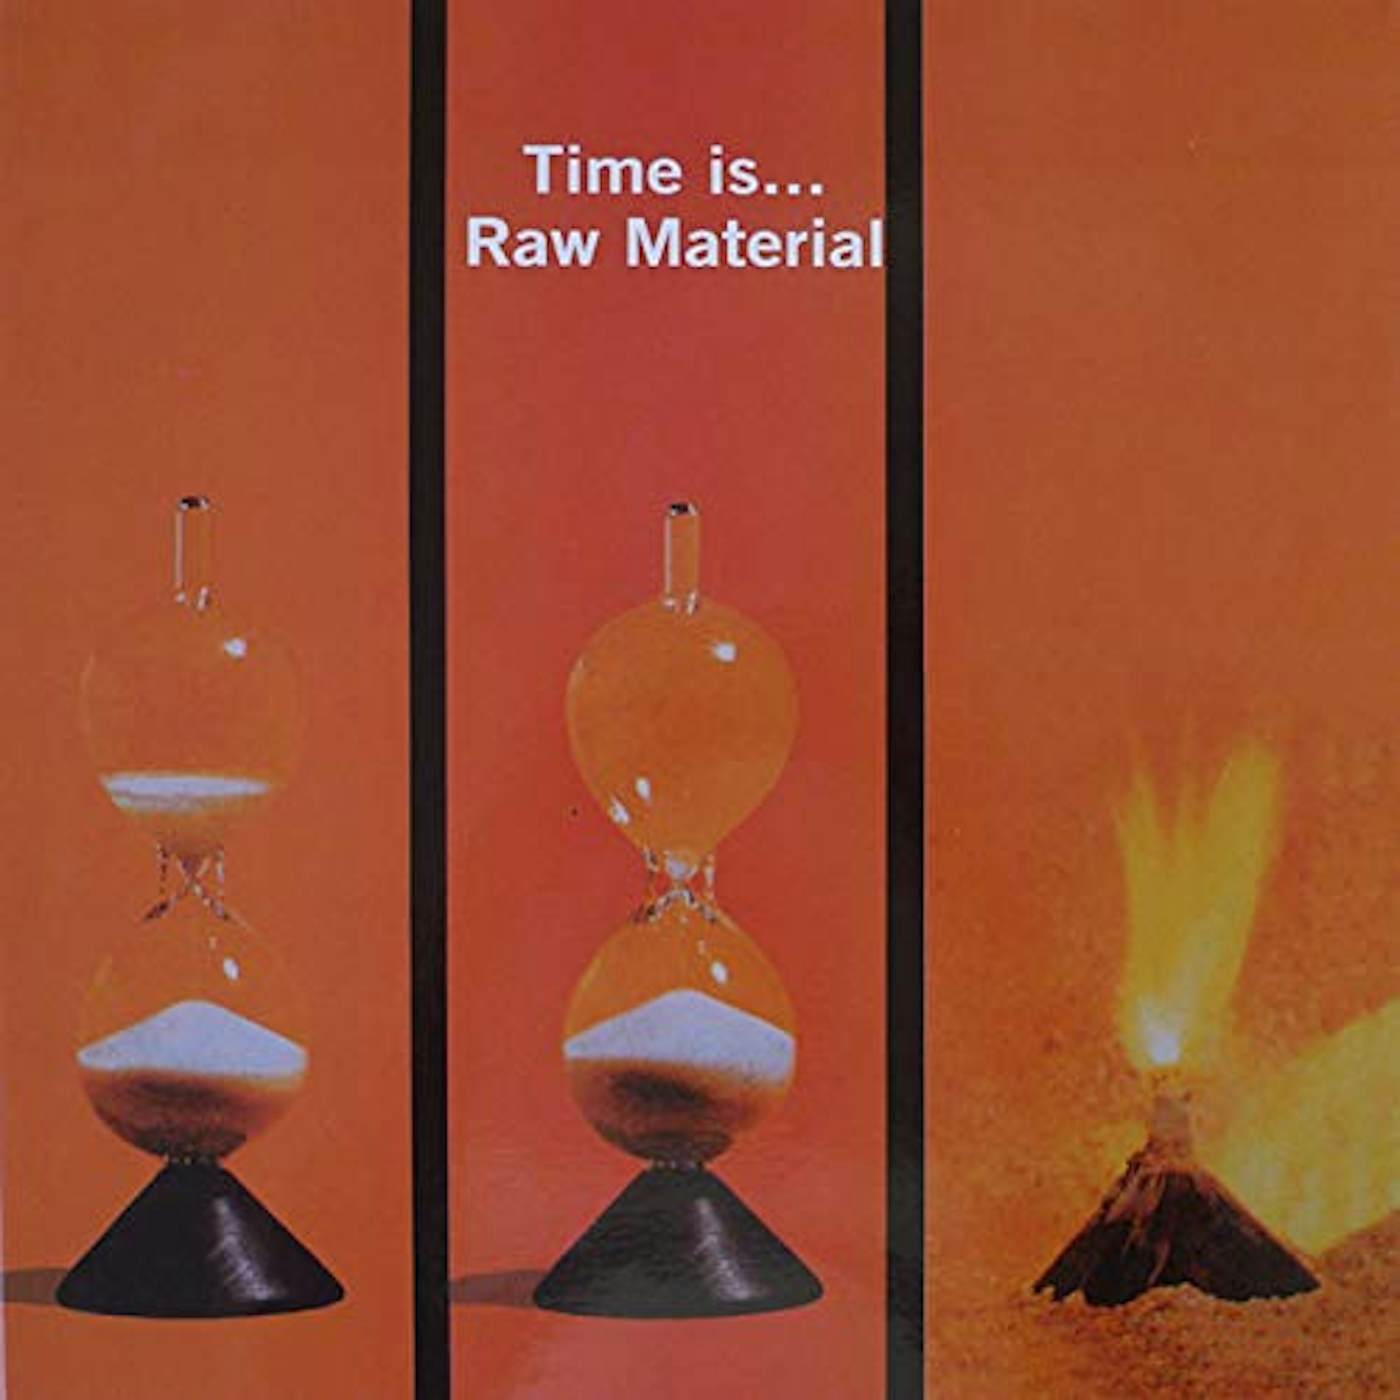 Raw Material TIME IS CD